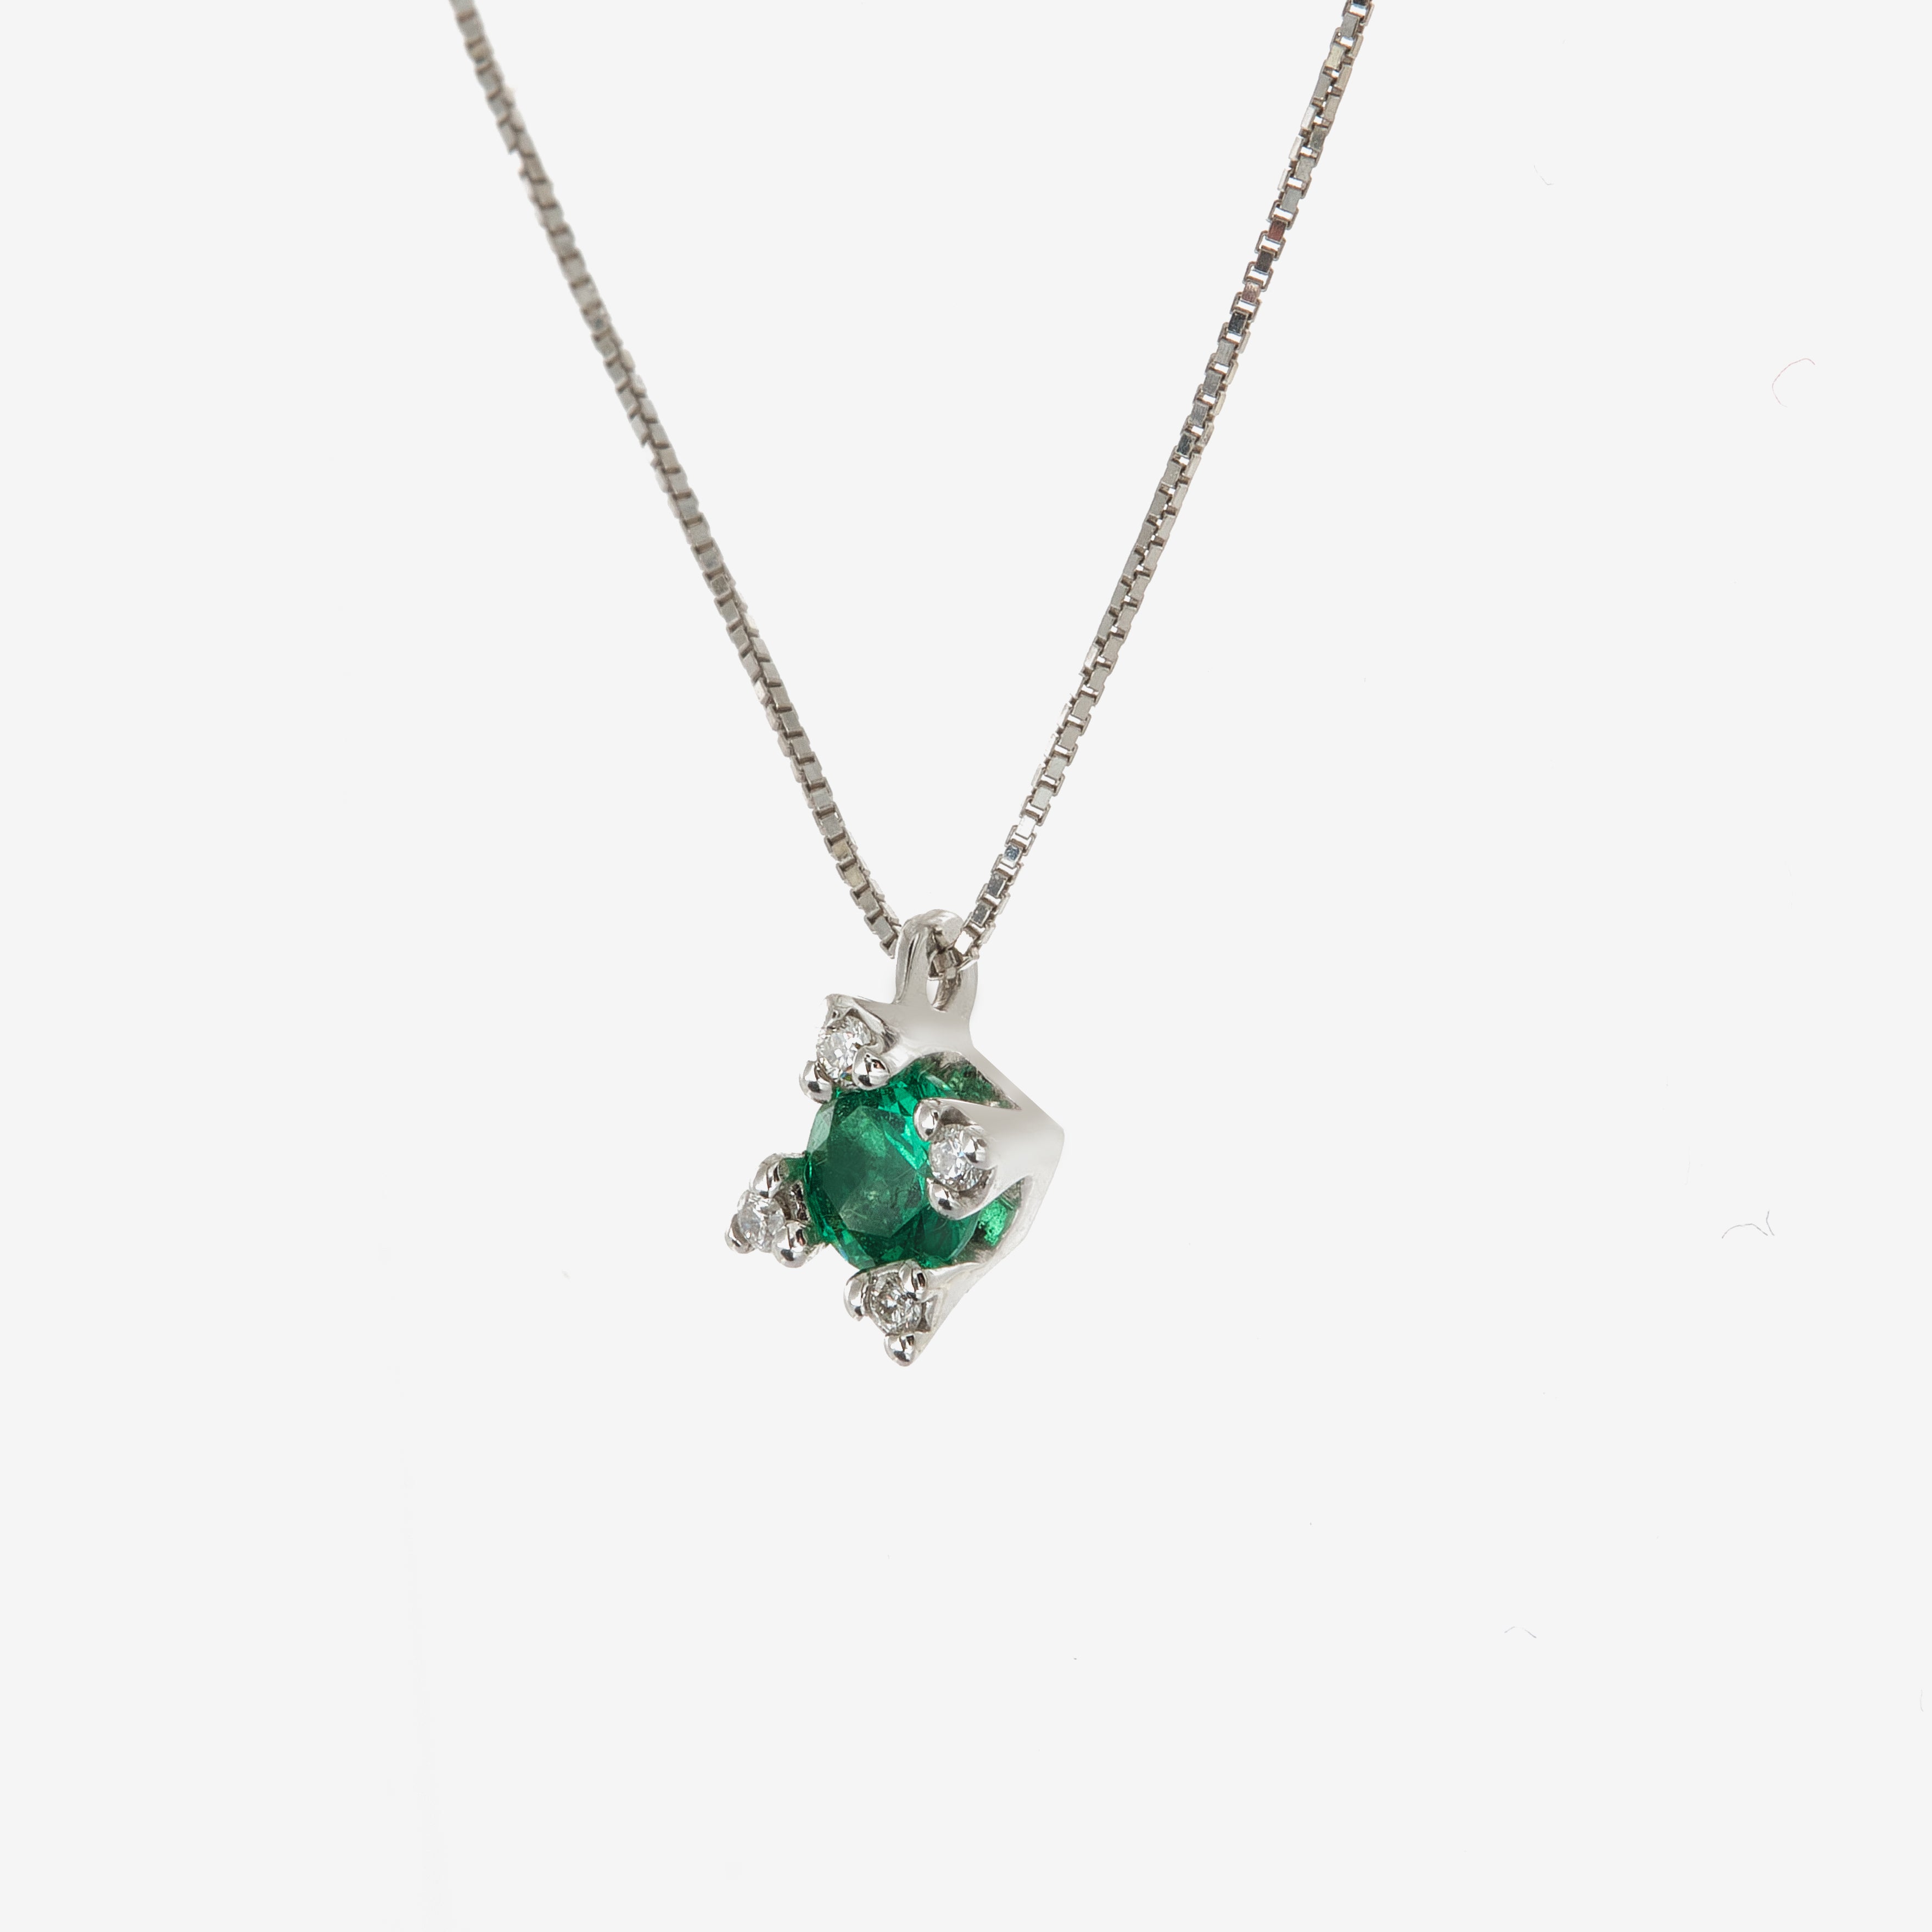 Star necklace with emerald and diamonds